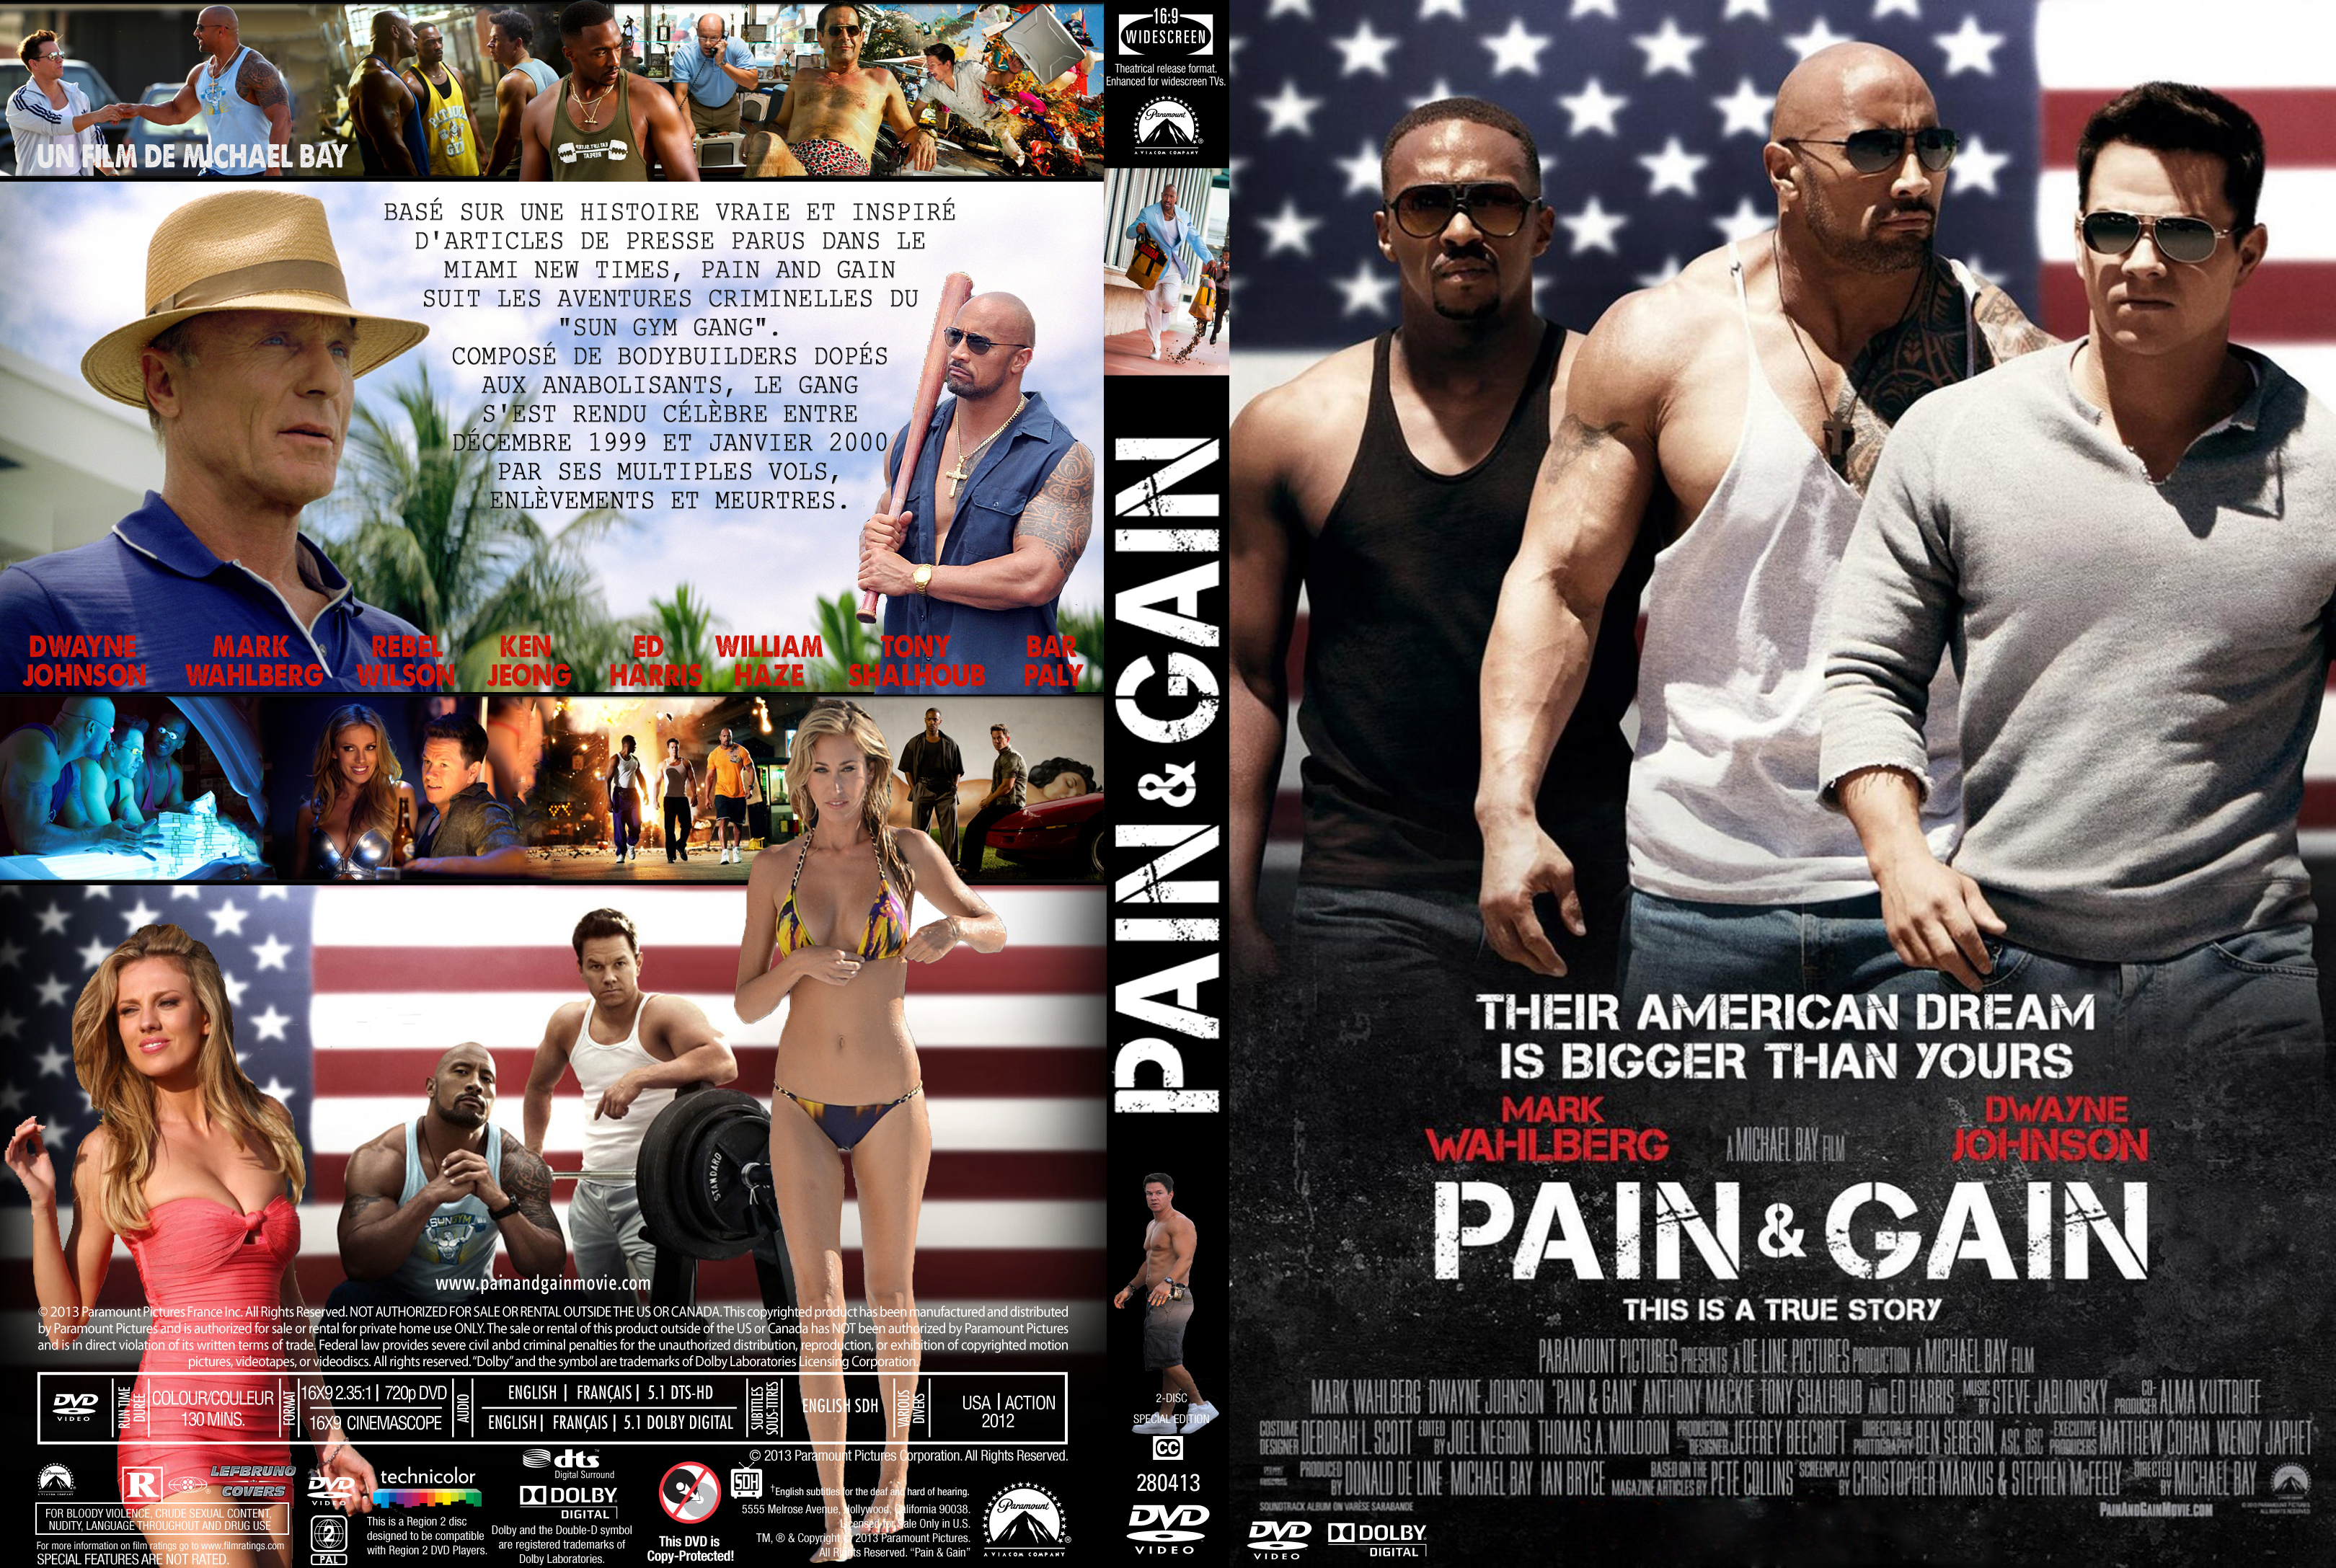 Jaquette DVD Pain and Gain custom.